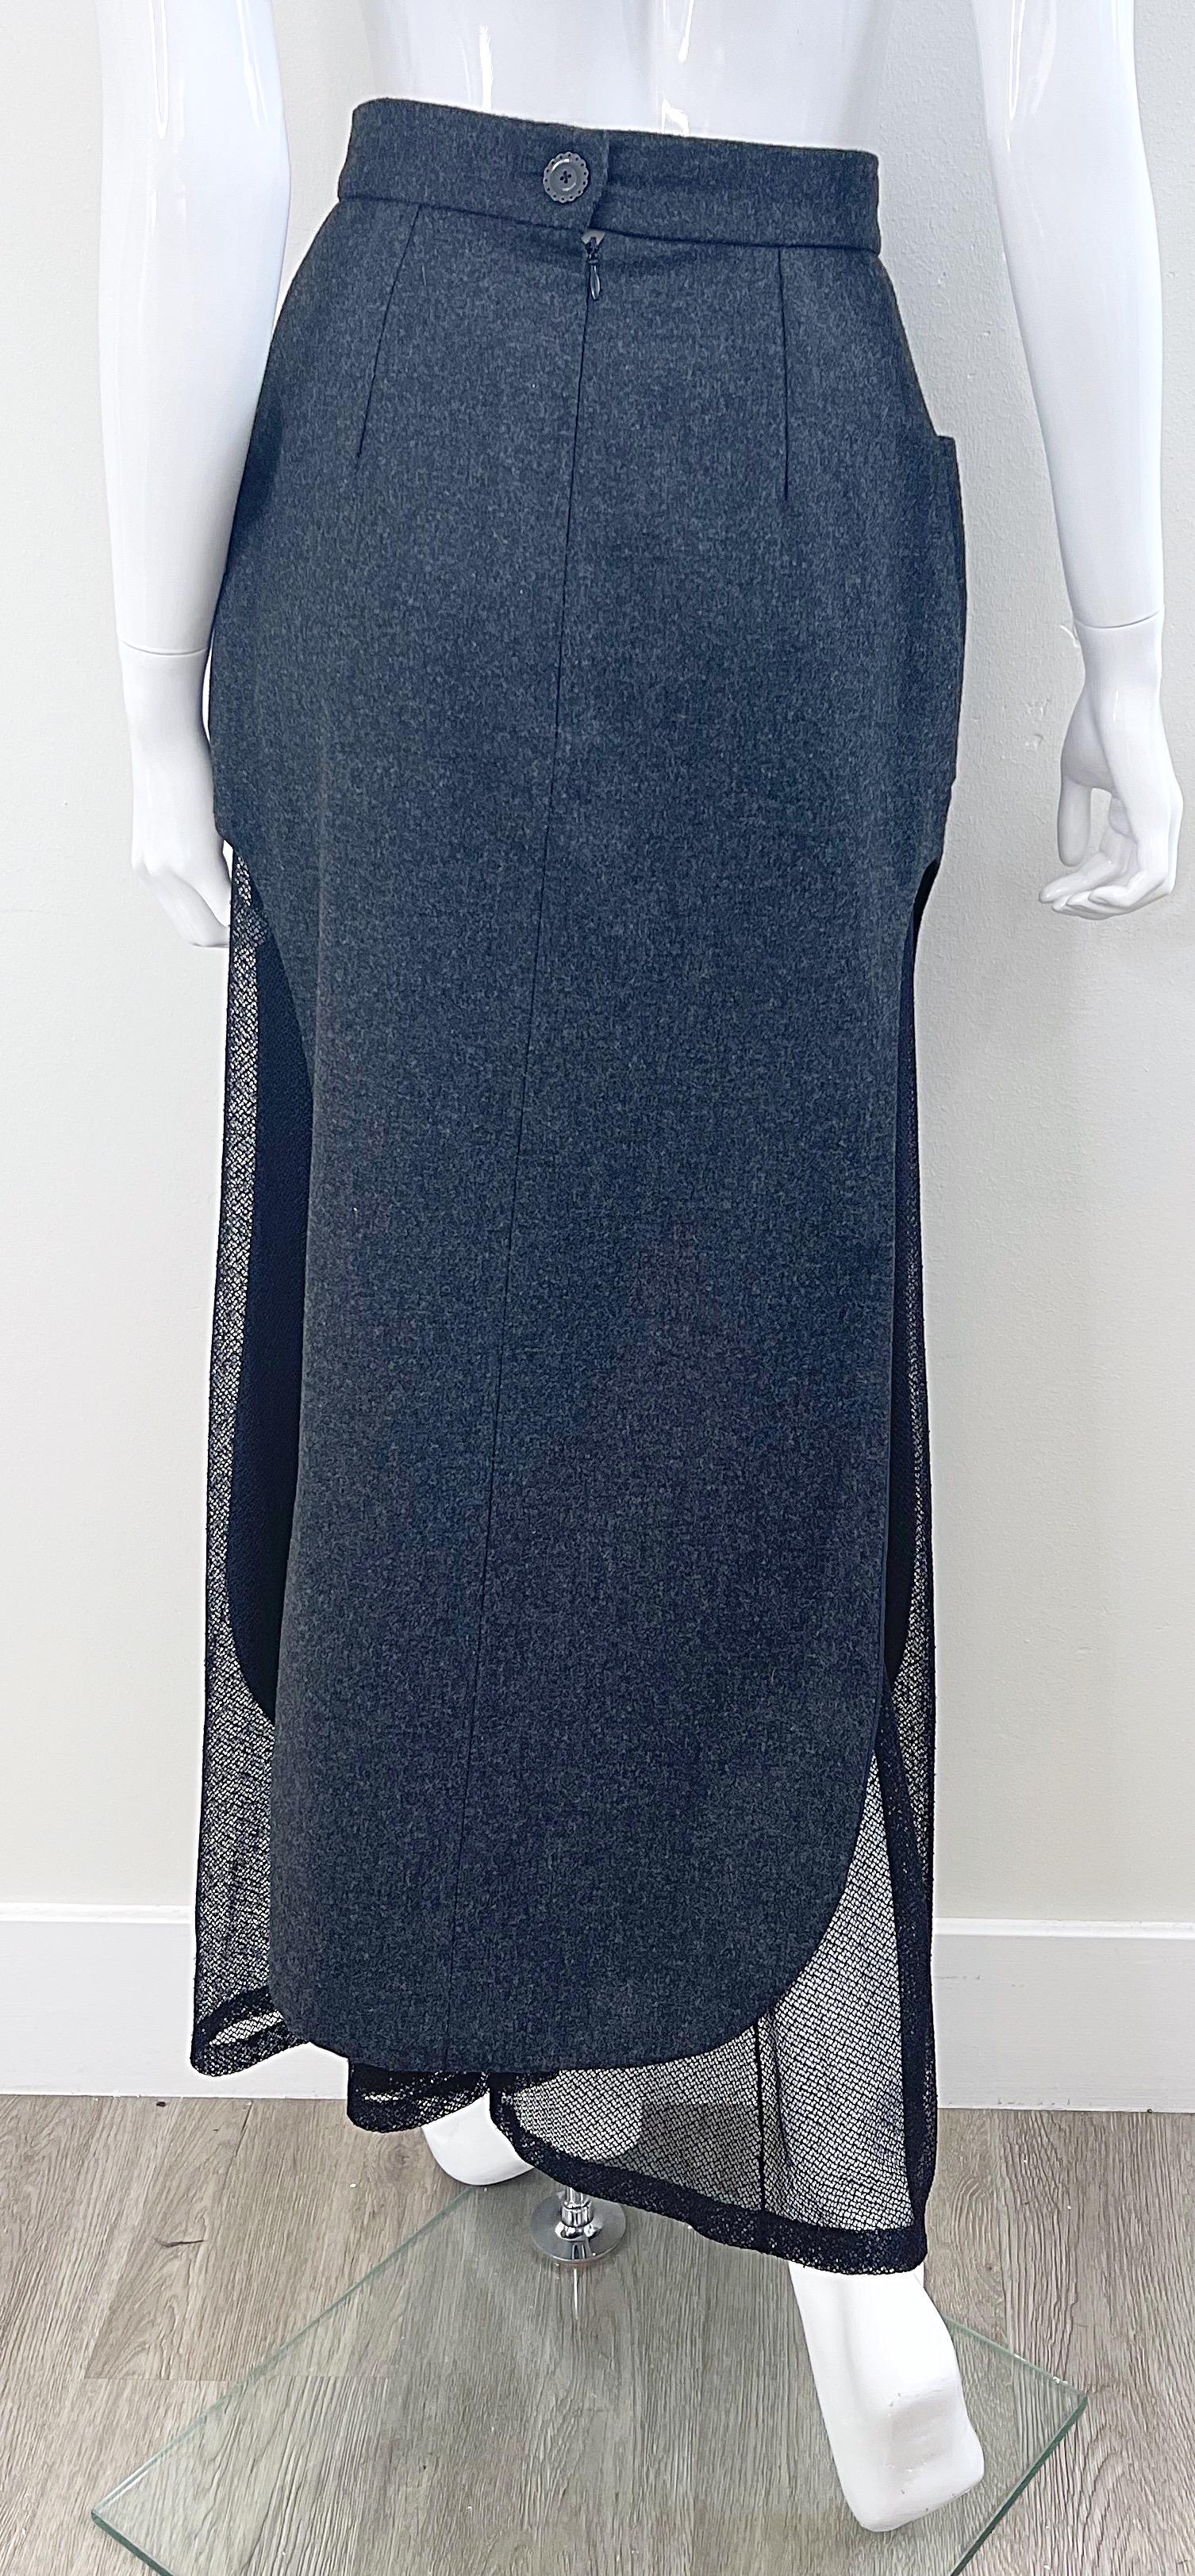 Karl Lagerfeld 1980s Grey Wool + Black Lace Vintage 80s Mini Maxi Skirt For Sale 11